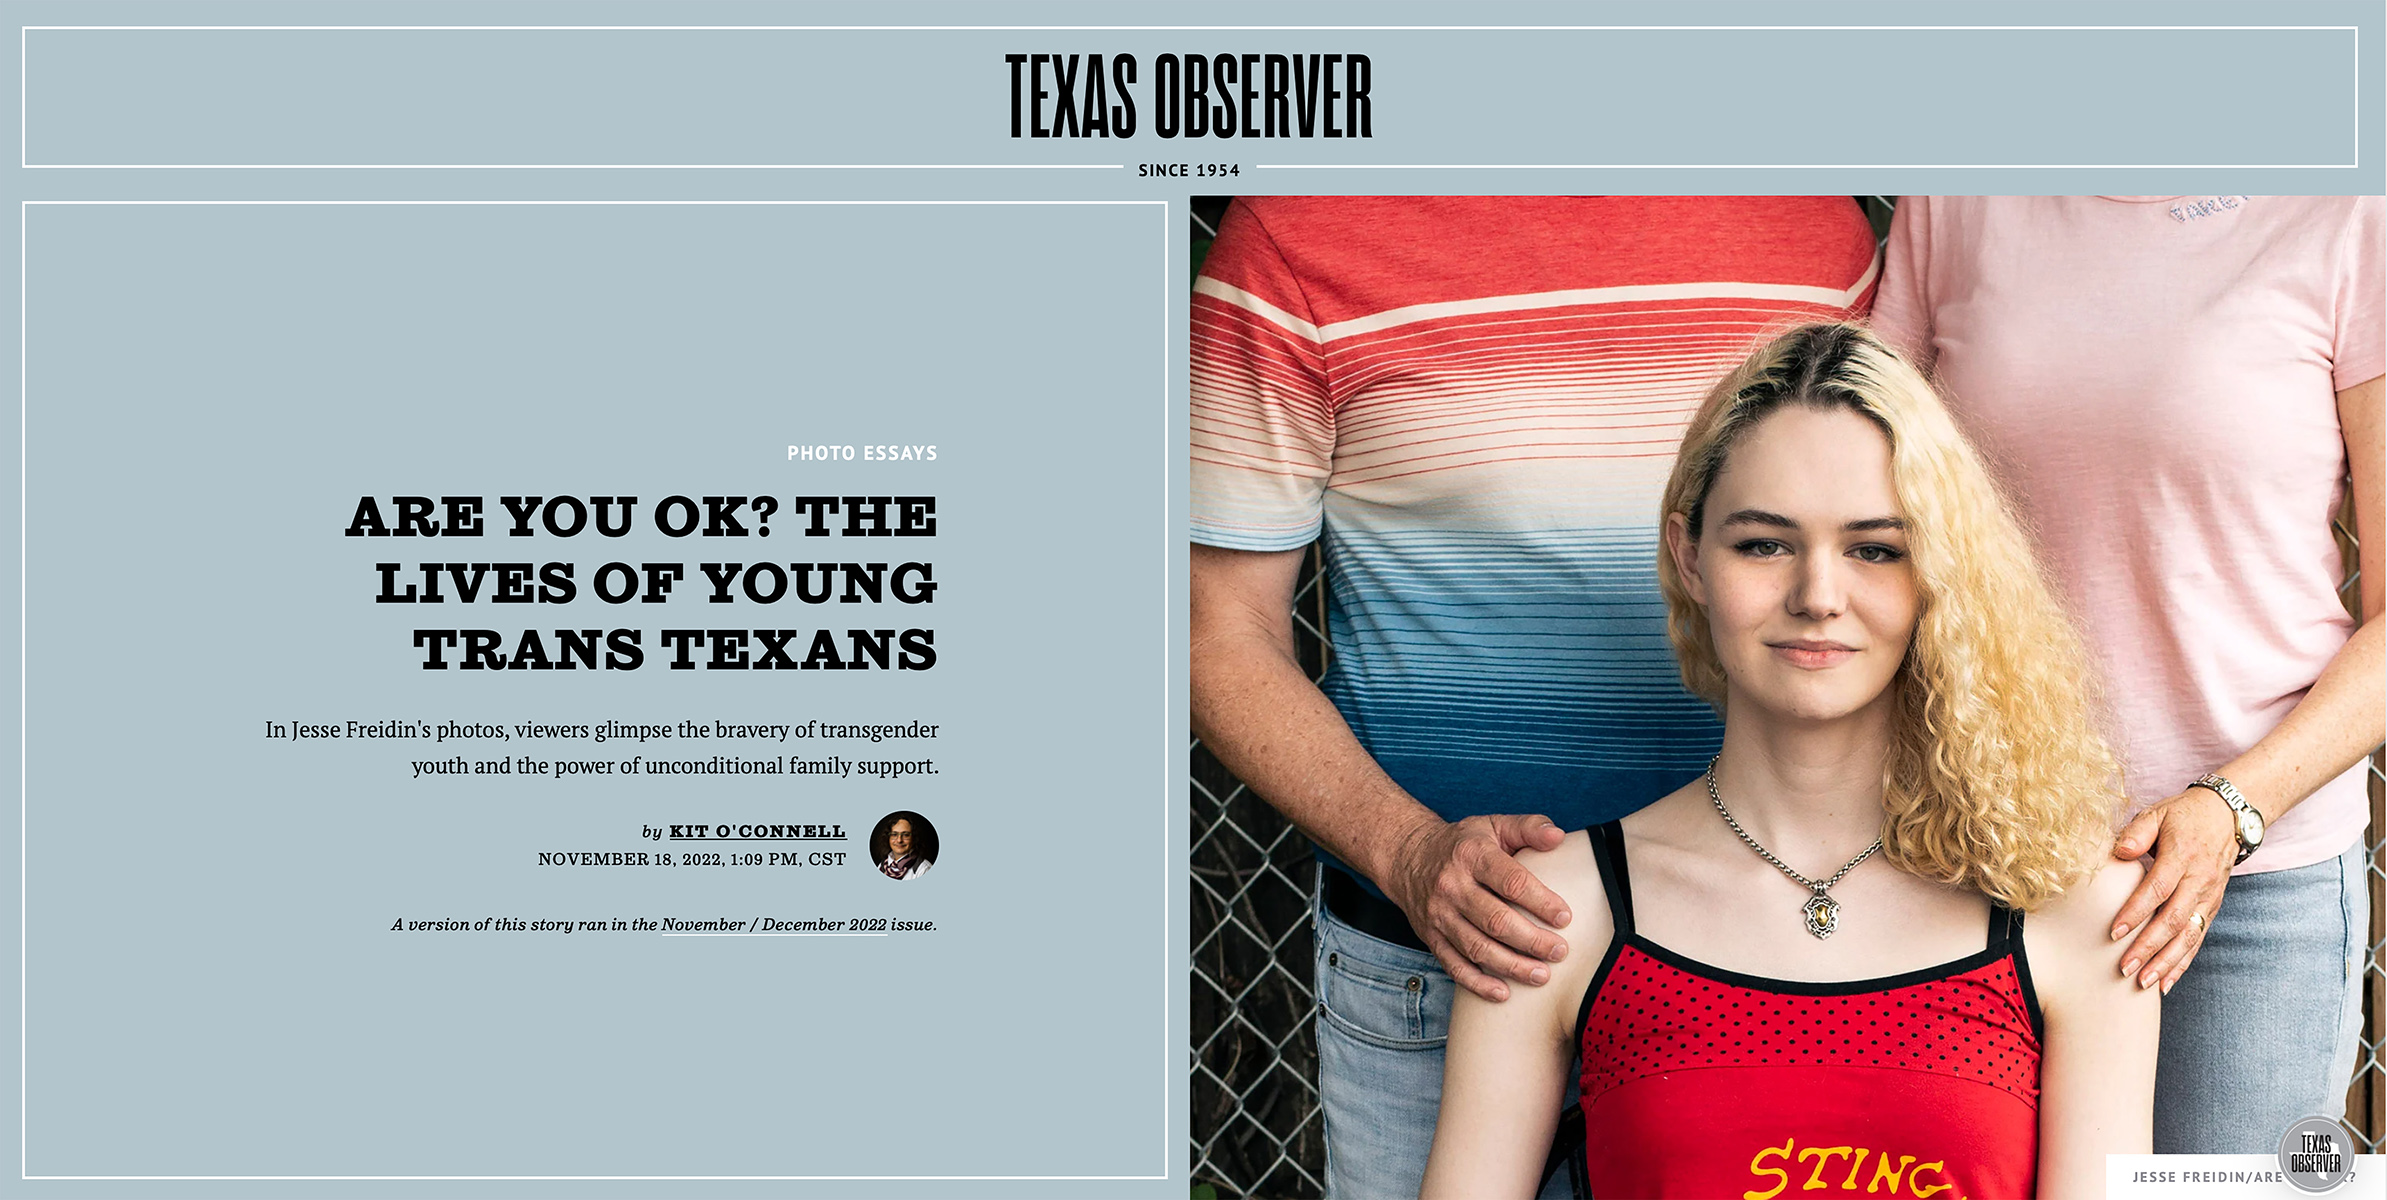 Texas Observer - Best Service and Lifestyle Story